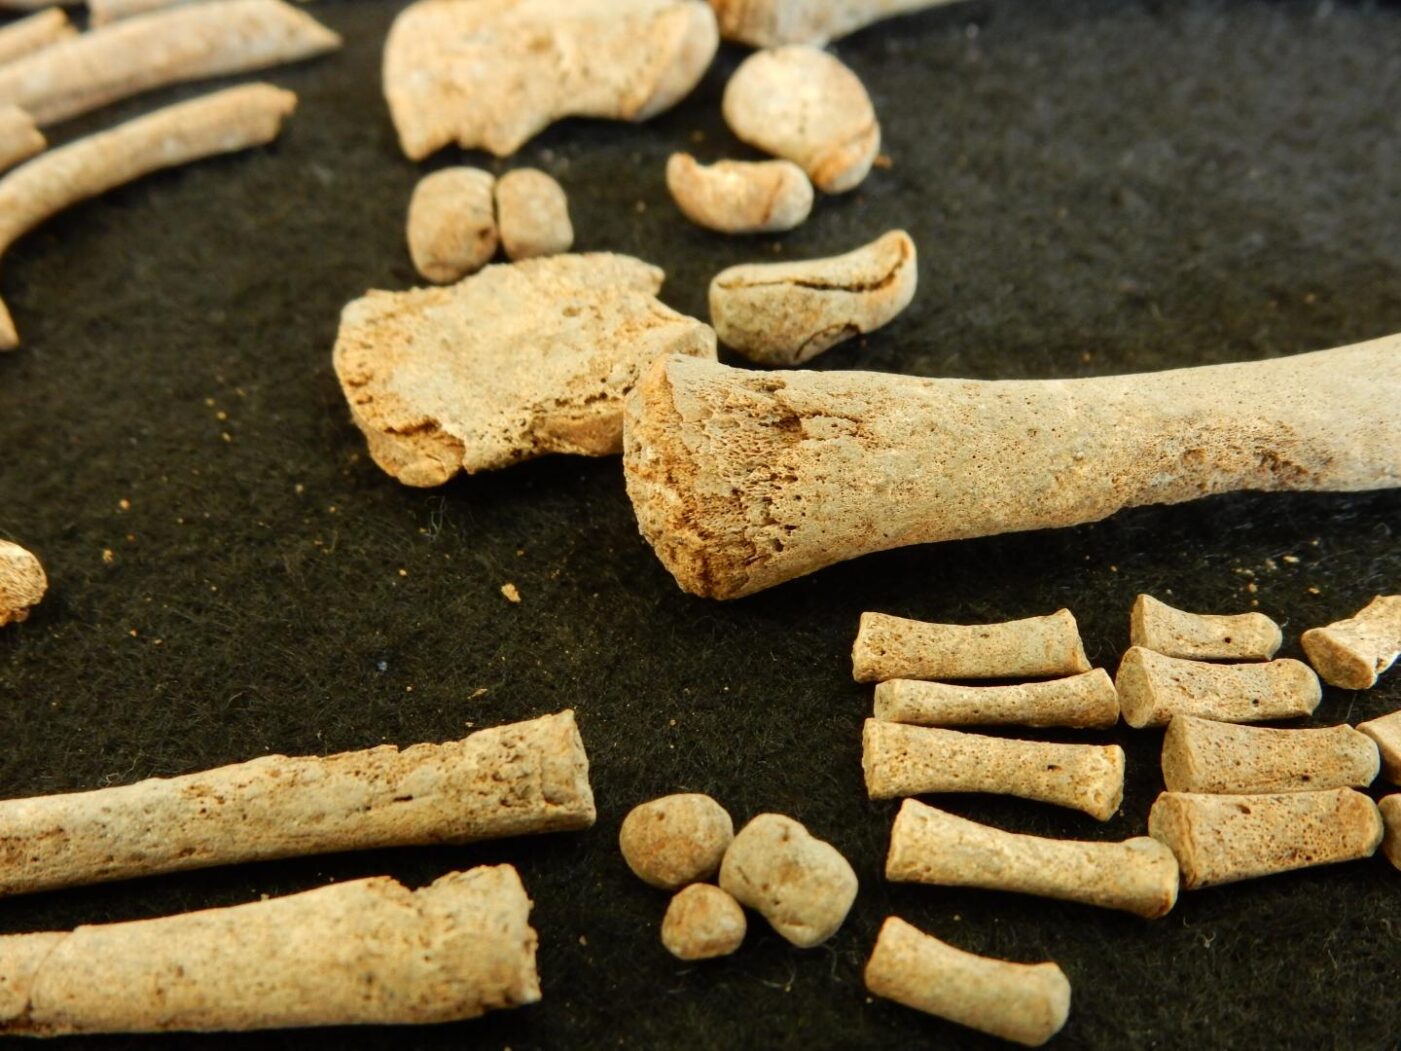 These are skeletal remains from individual 94A, who was infected with syphilis and was 6 months old at the time of death. The skeleton displays characteristic signs of a treponemal disease. [Rodrigo Barquera. Santa Isabel collection, Lab. of Osteology, ENAH, Mexico (permission No. 401.15.3-2017/1065 INAH).]